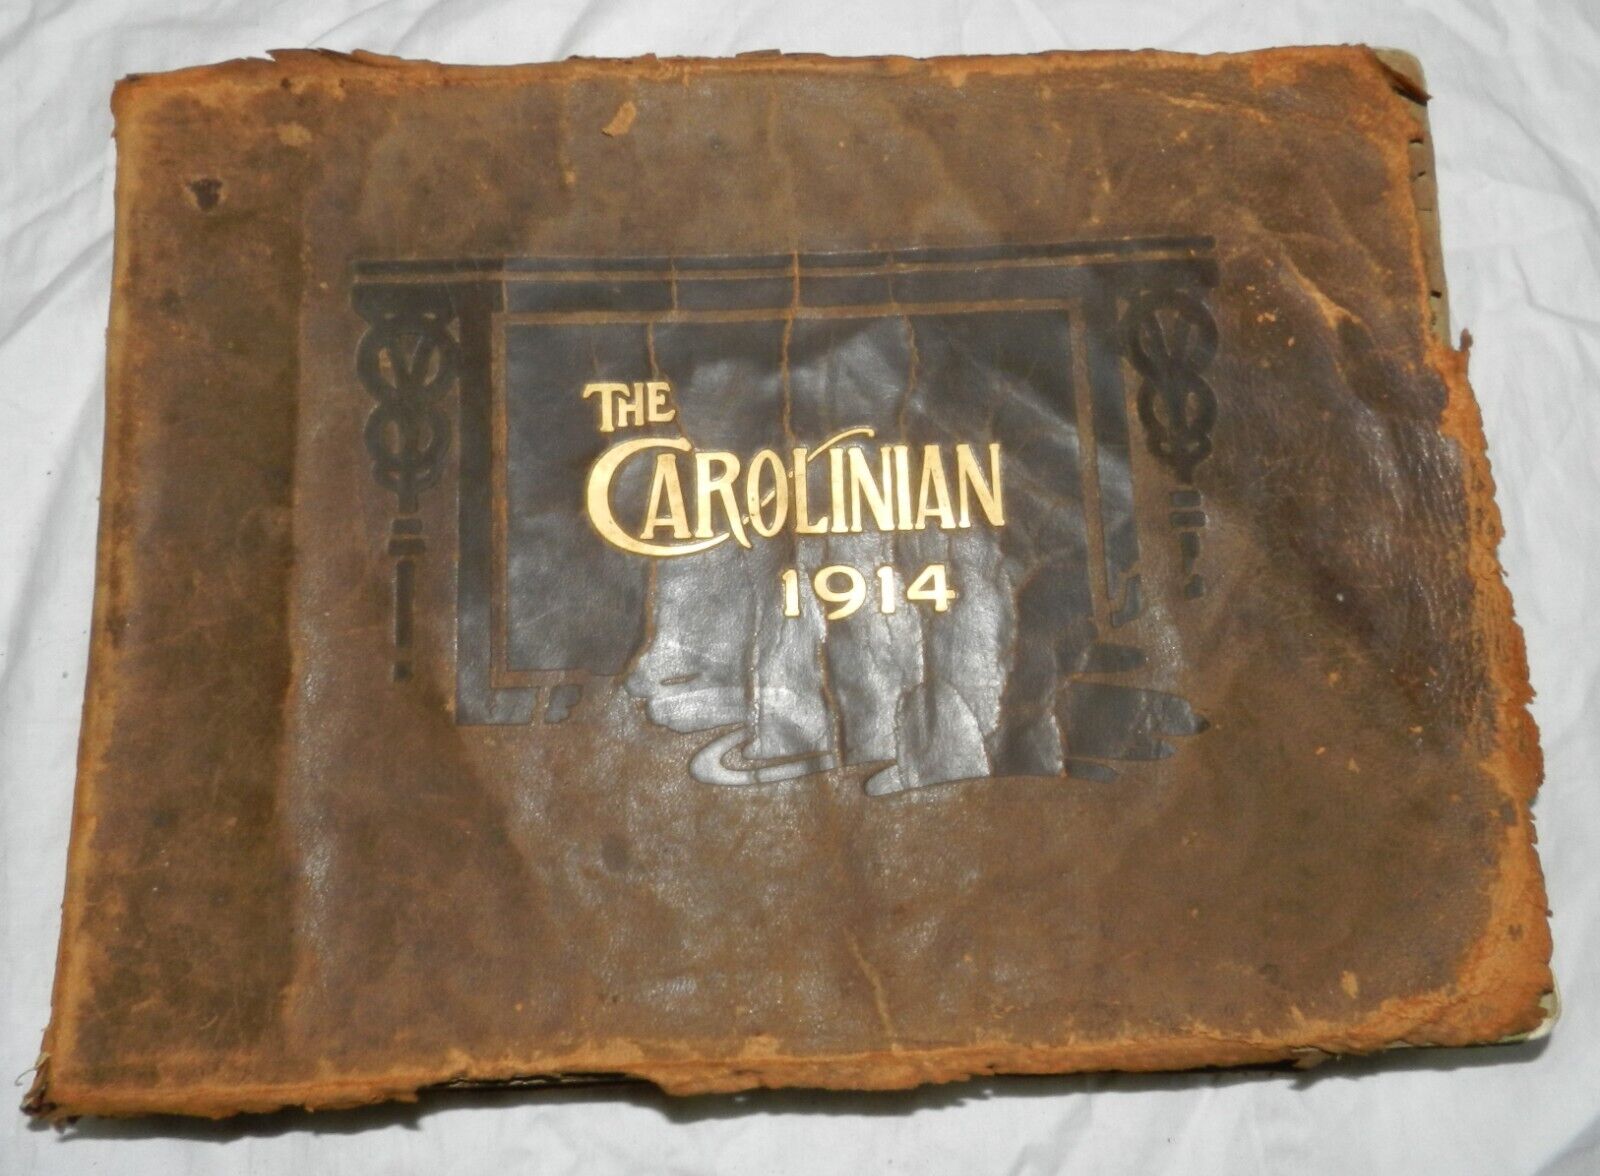 Vintage 1914 College Yearbook - The Carolinian, Greensboro, NC Normal Annual